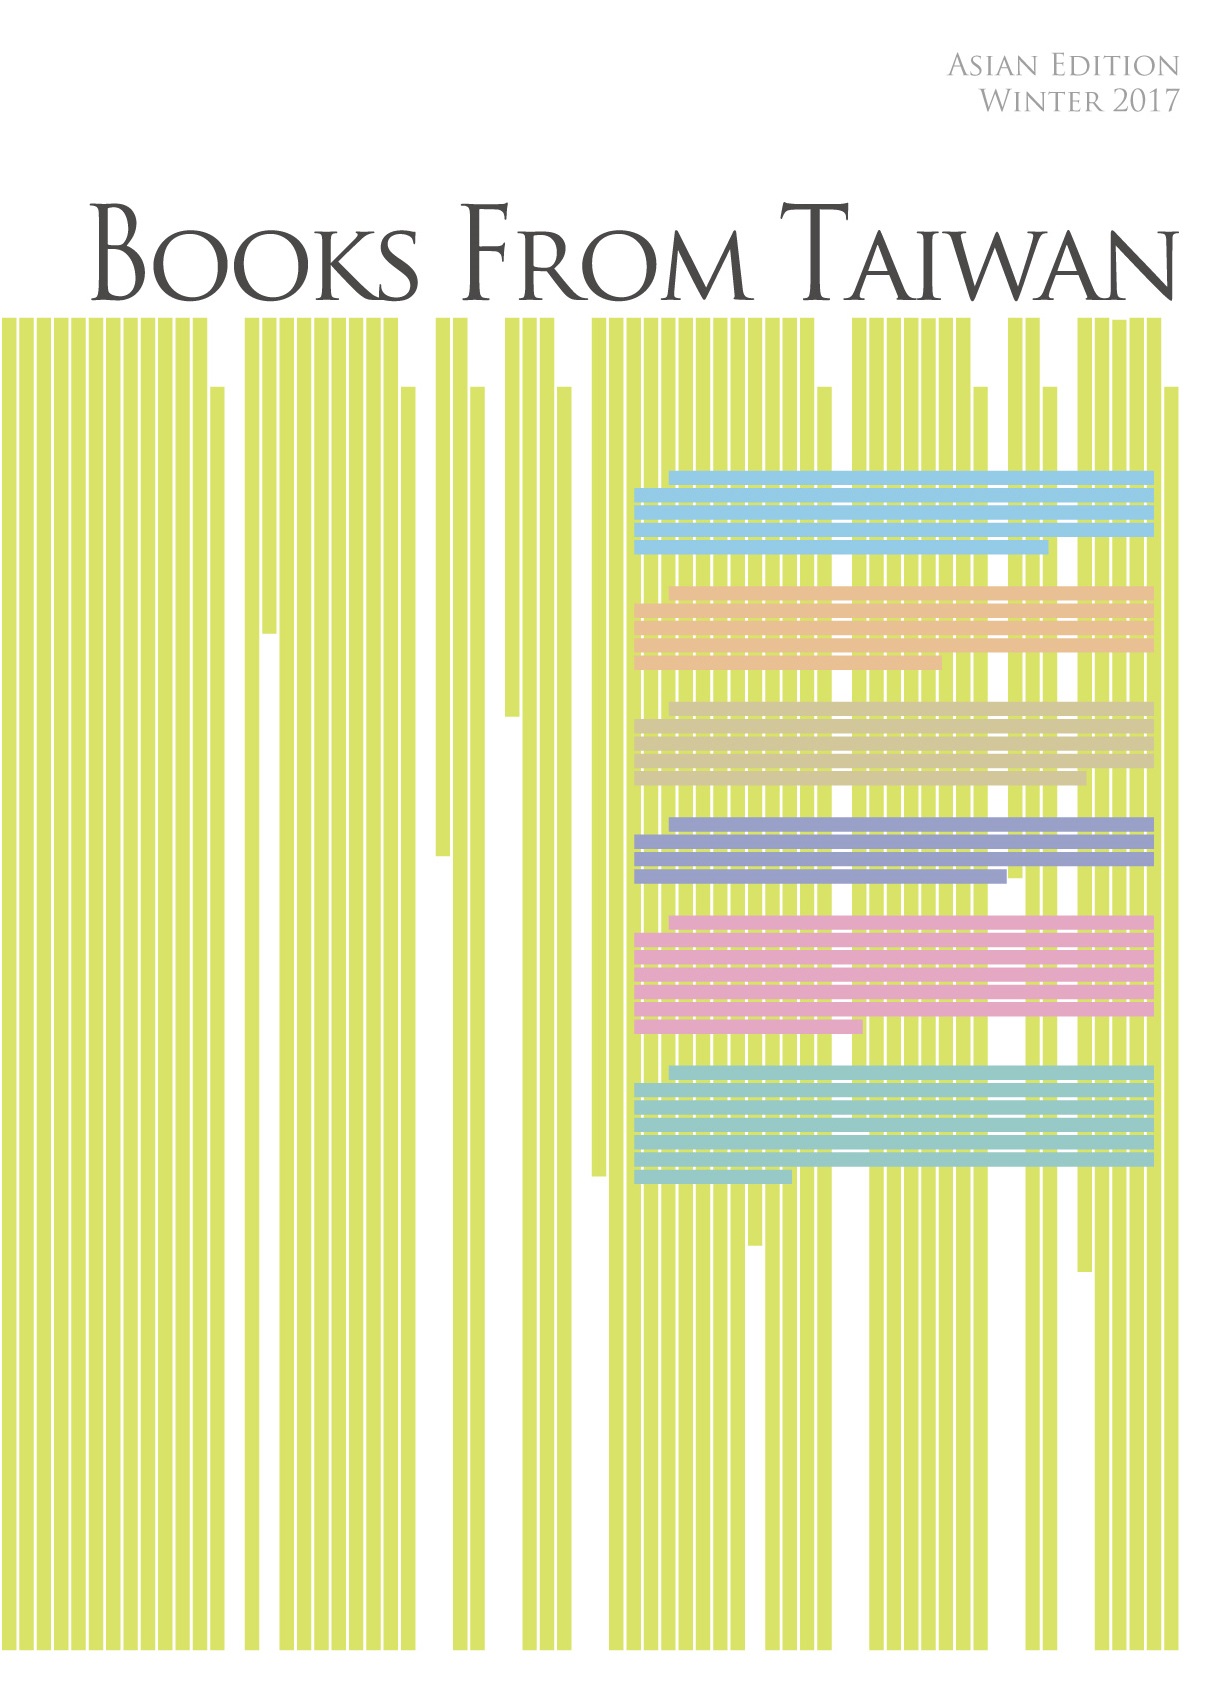 Books from Taiwan Asian Edition 2017